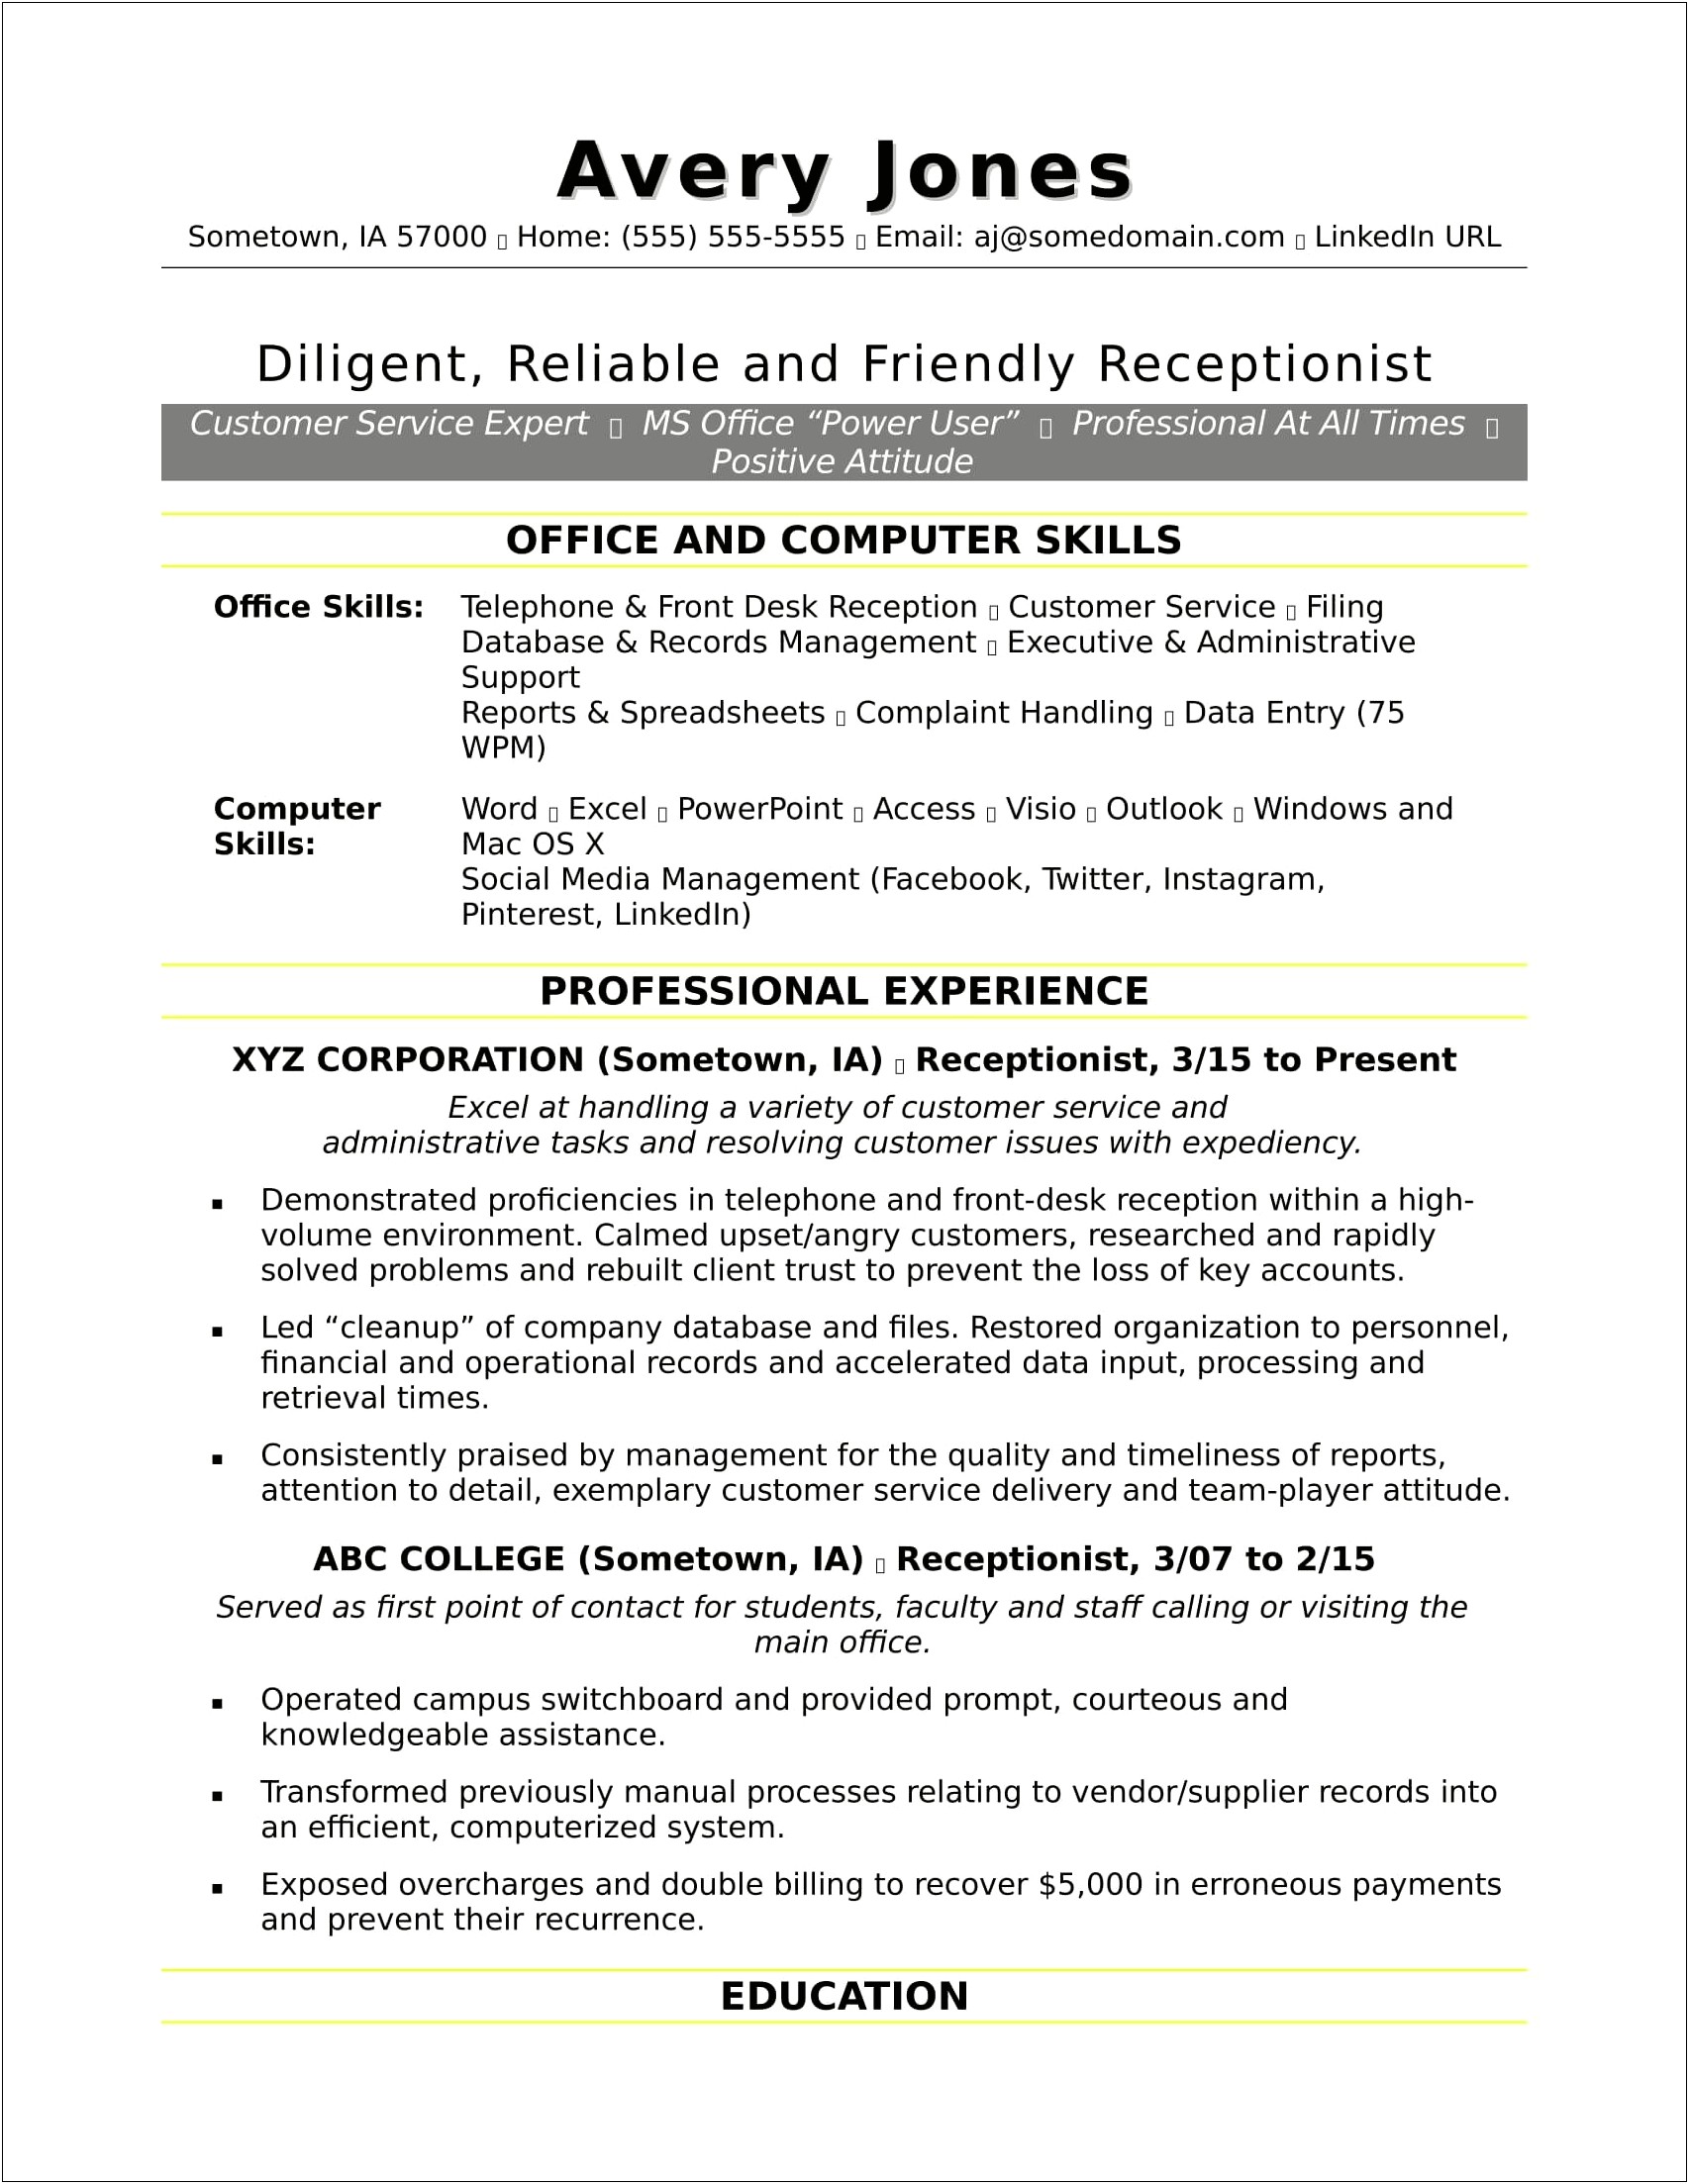 Resume Wording For Answering Busy Phones